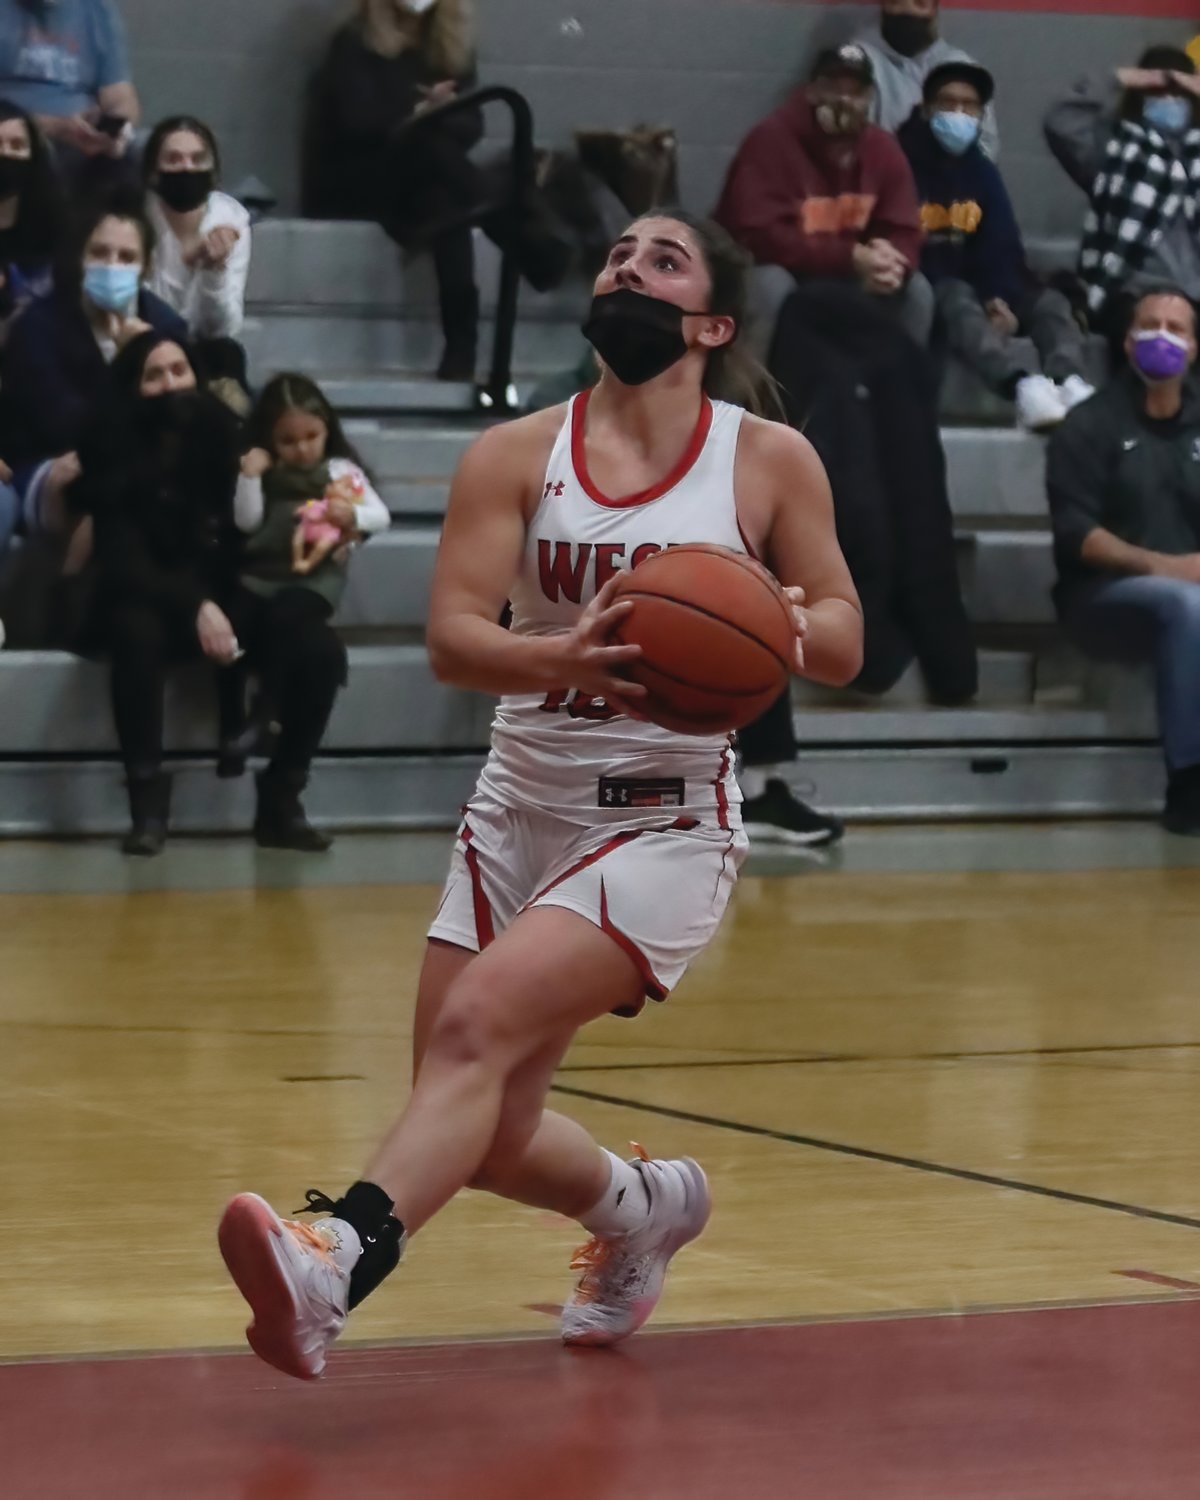 PLAYOFF PUSH:
Cranston West’s Maddie
Alves drives to the basket
against North Kingstown
last week. The Falcons split
their games last weekend
to remain in the playoff picture
and are looking to
make a strong push as they
enter the back half of their
regular season slate. (Photos
by Mike Zawistoski